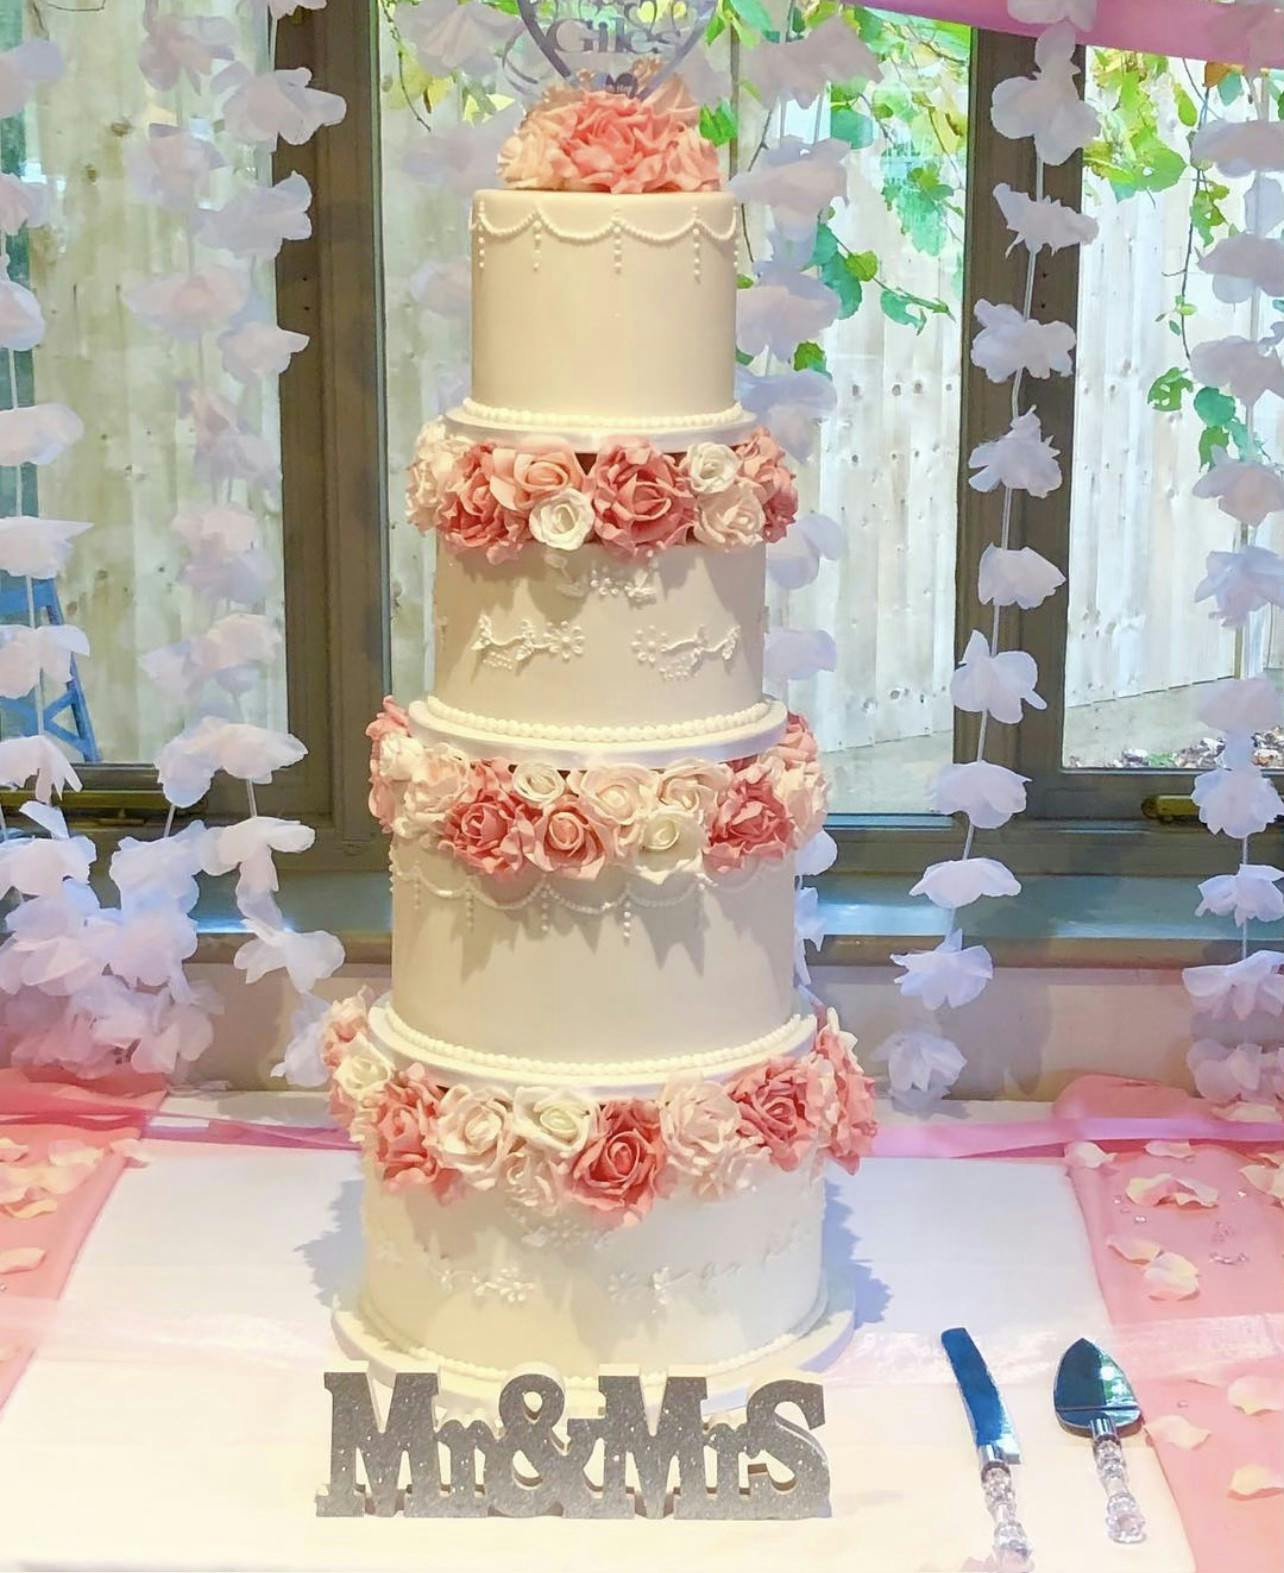 White and cream wedding cake with white and pink flowers and cake pearls